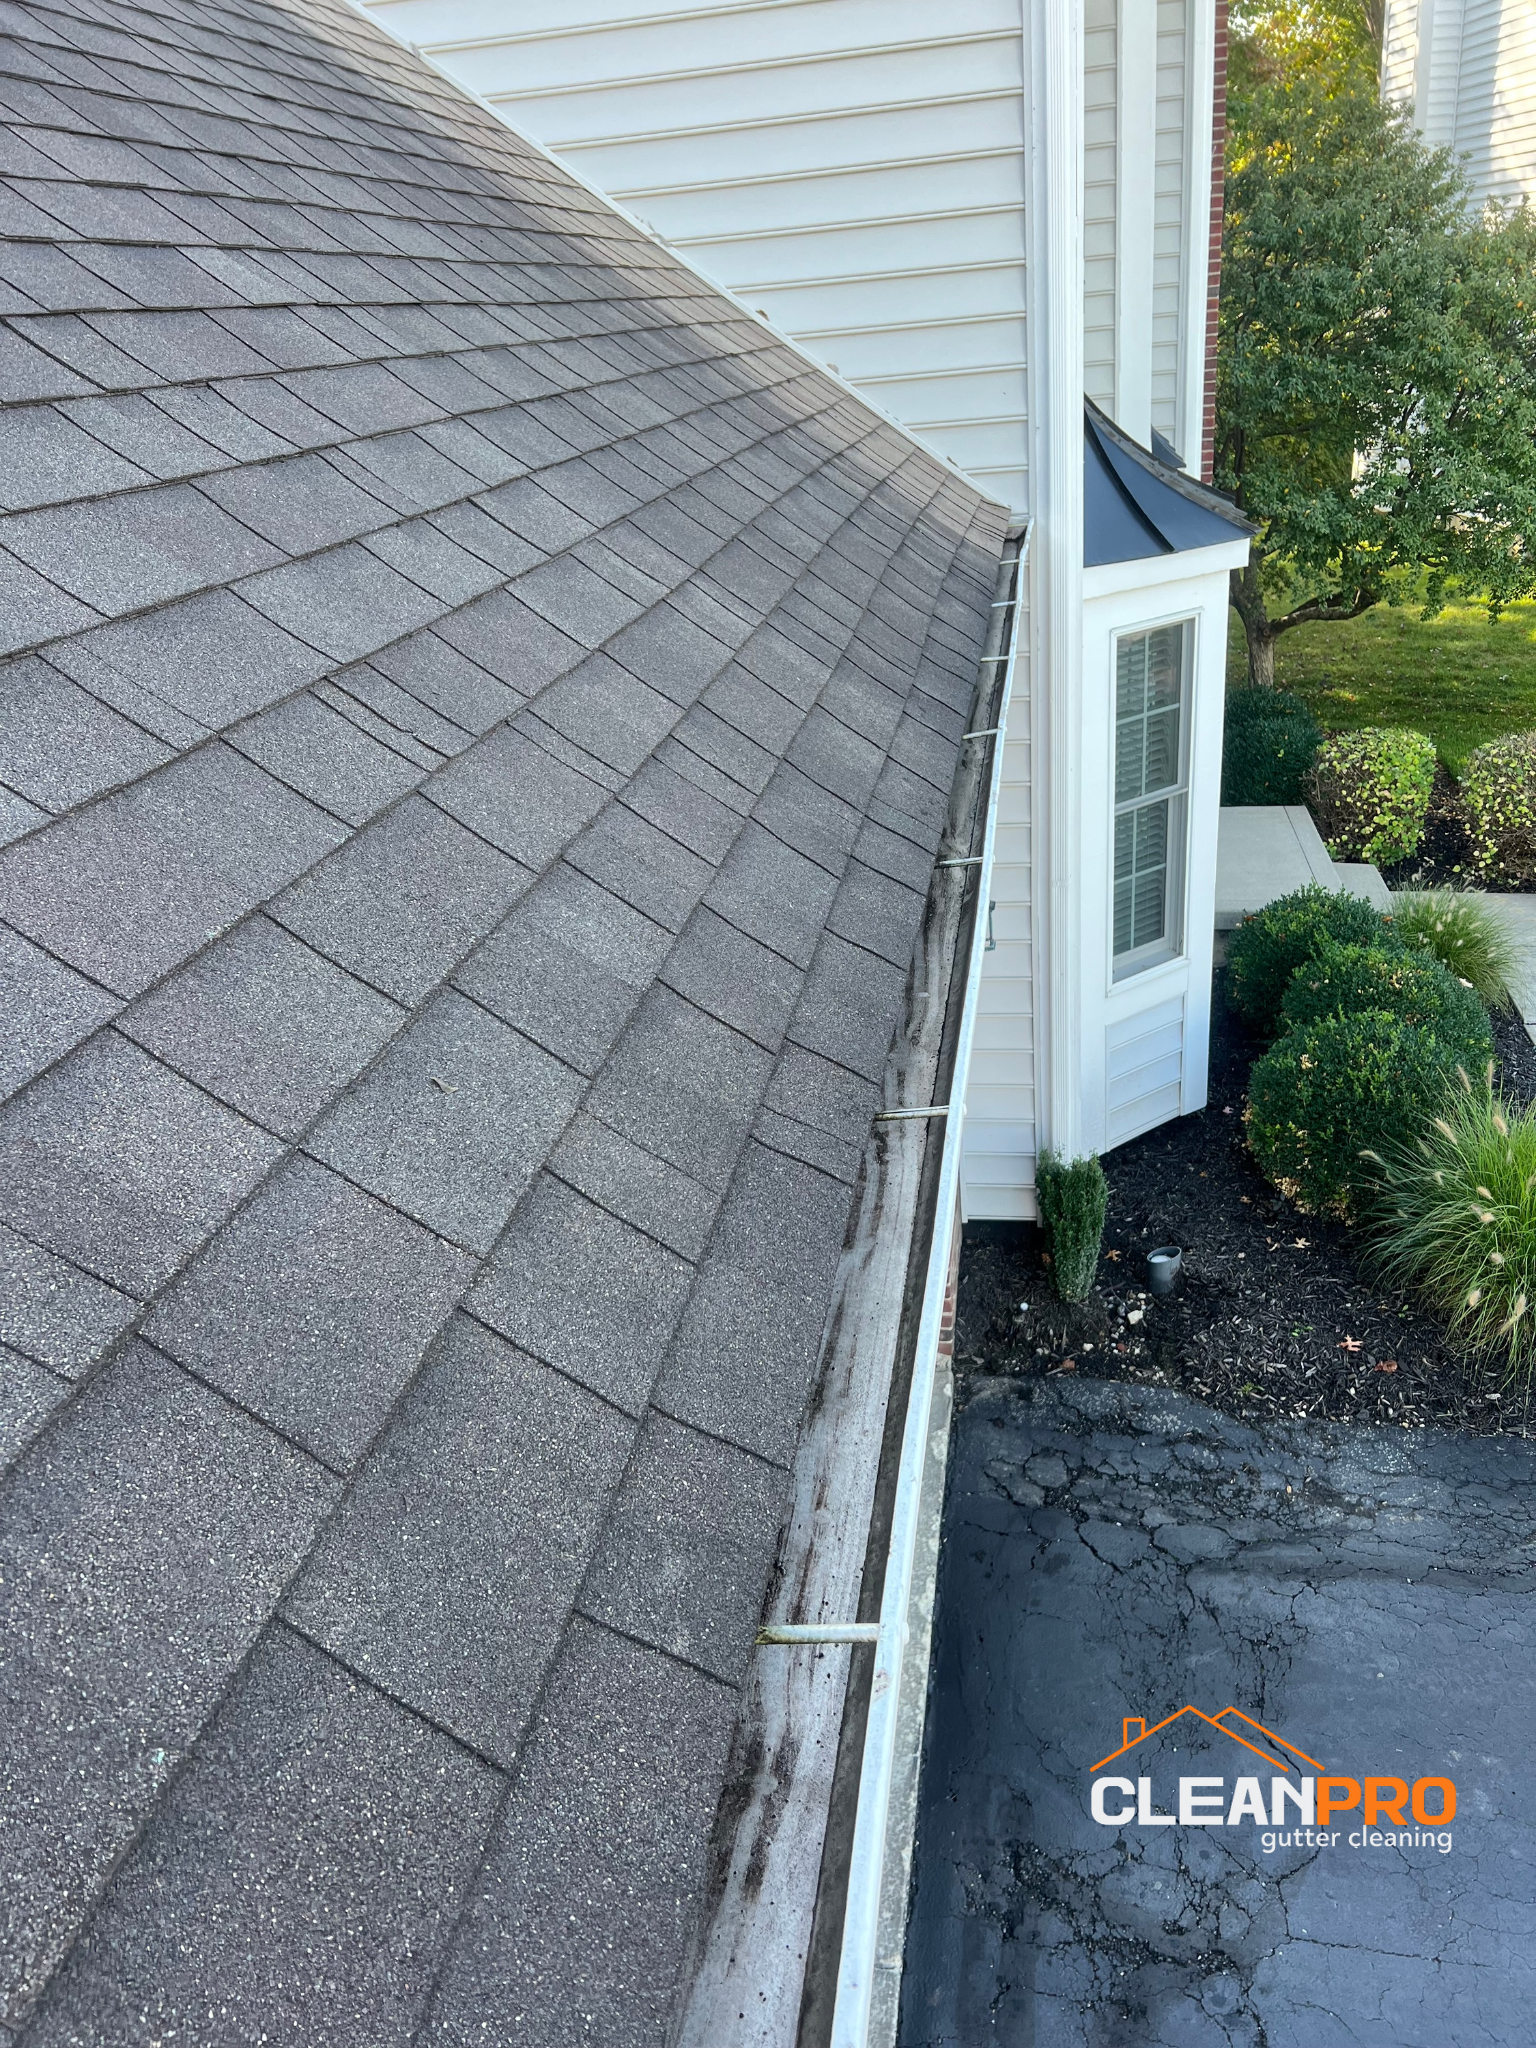 Local Gutter Cleaning in Cleveland